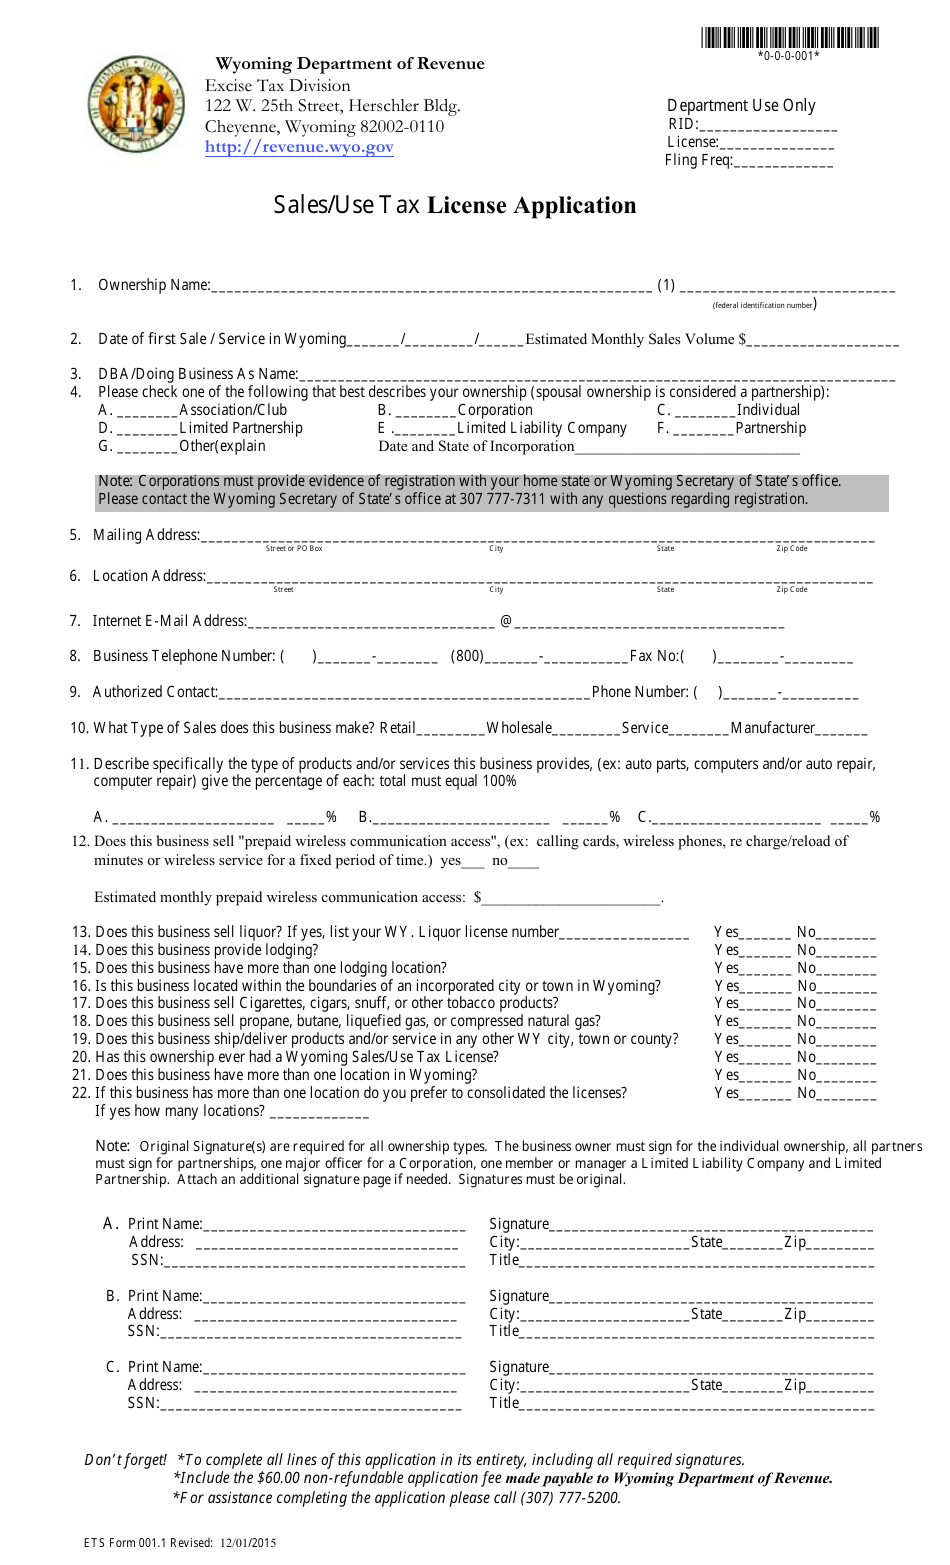 ETS Form 001.1 Sales / Use Tax License Application - Wyoming, Page 1